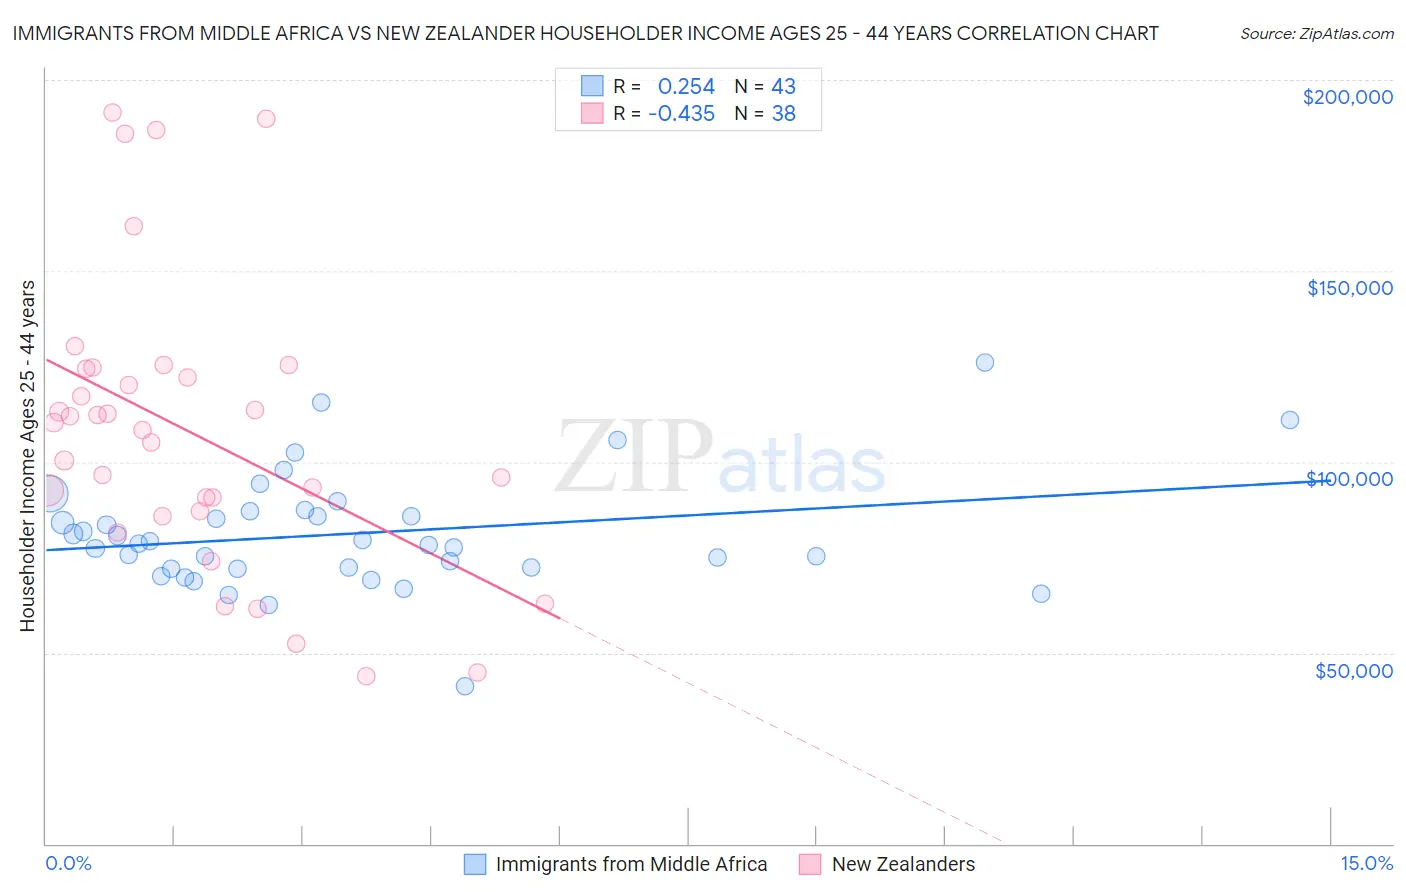 Immigrants from Middle Africa vs New Zealander Householder Income Ages 25 - 44 years